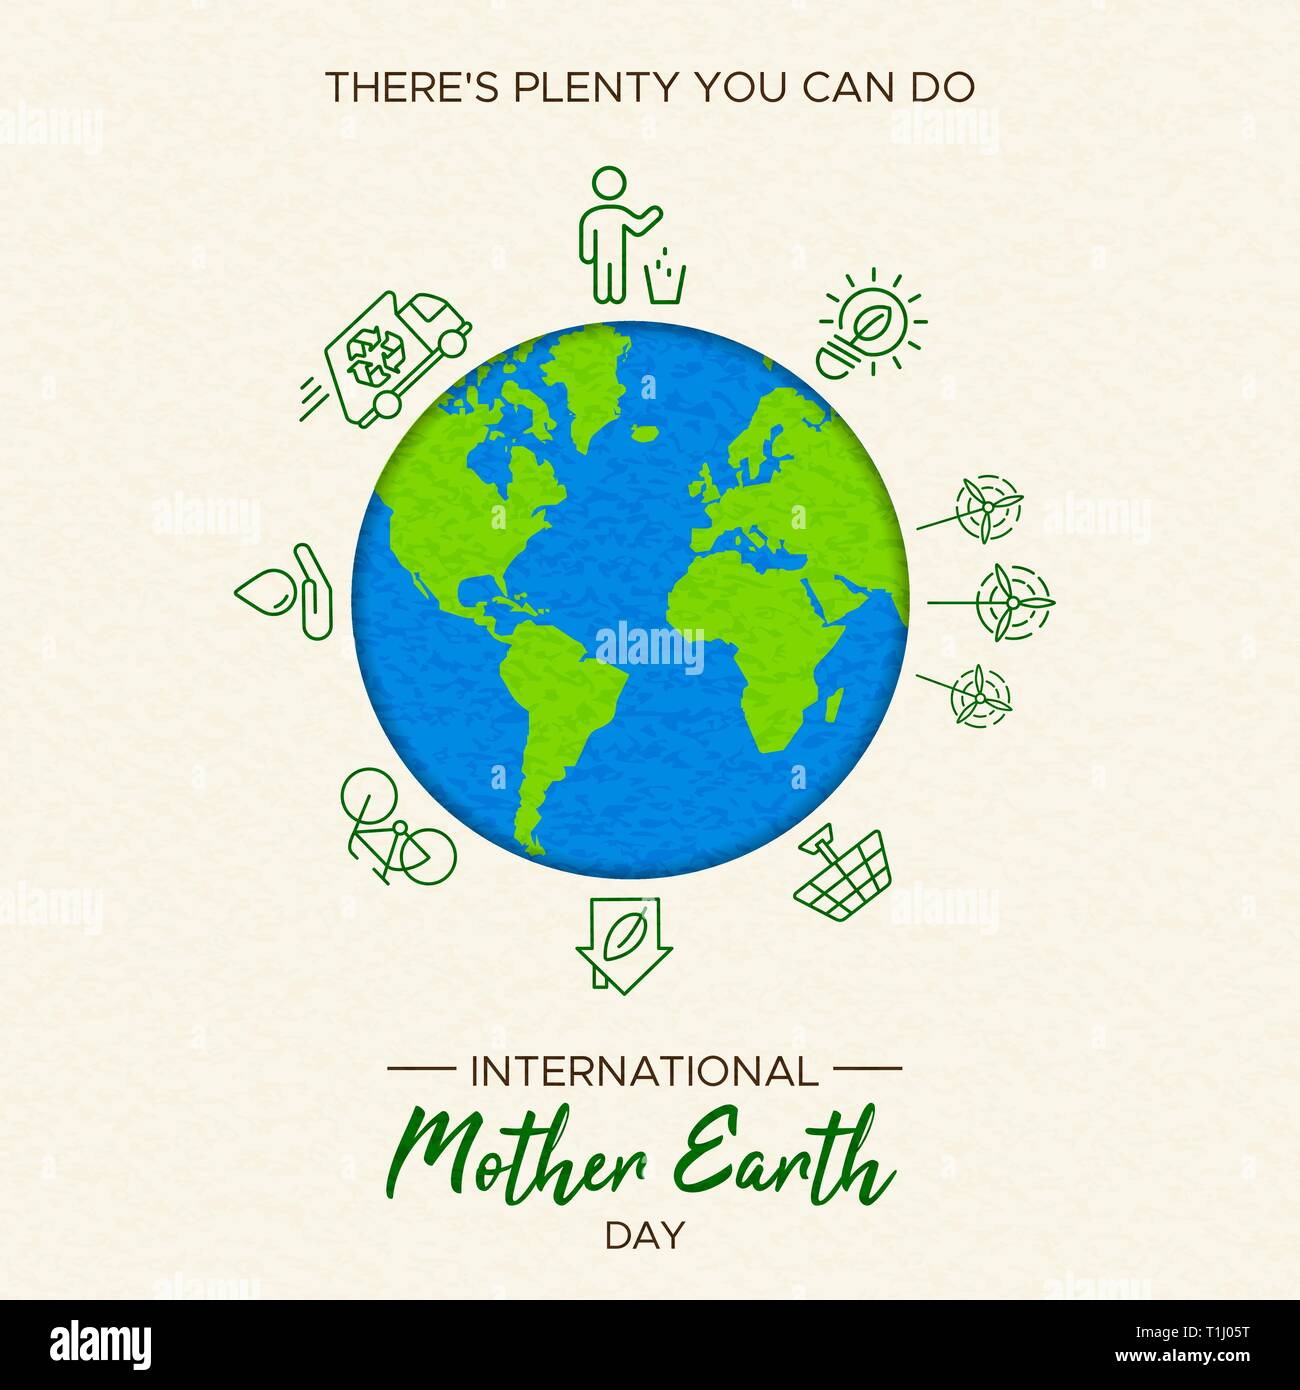 International Earth Day illustration. Save the world concept for eco friendly activities and social environment awareness. Stock Vector